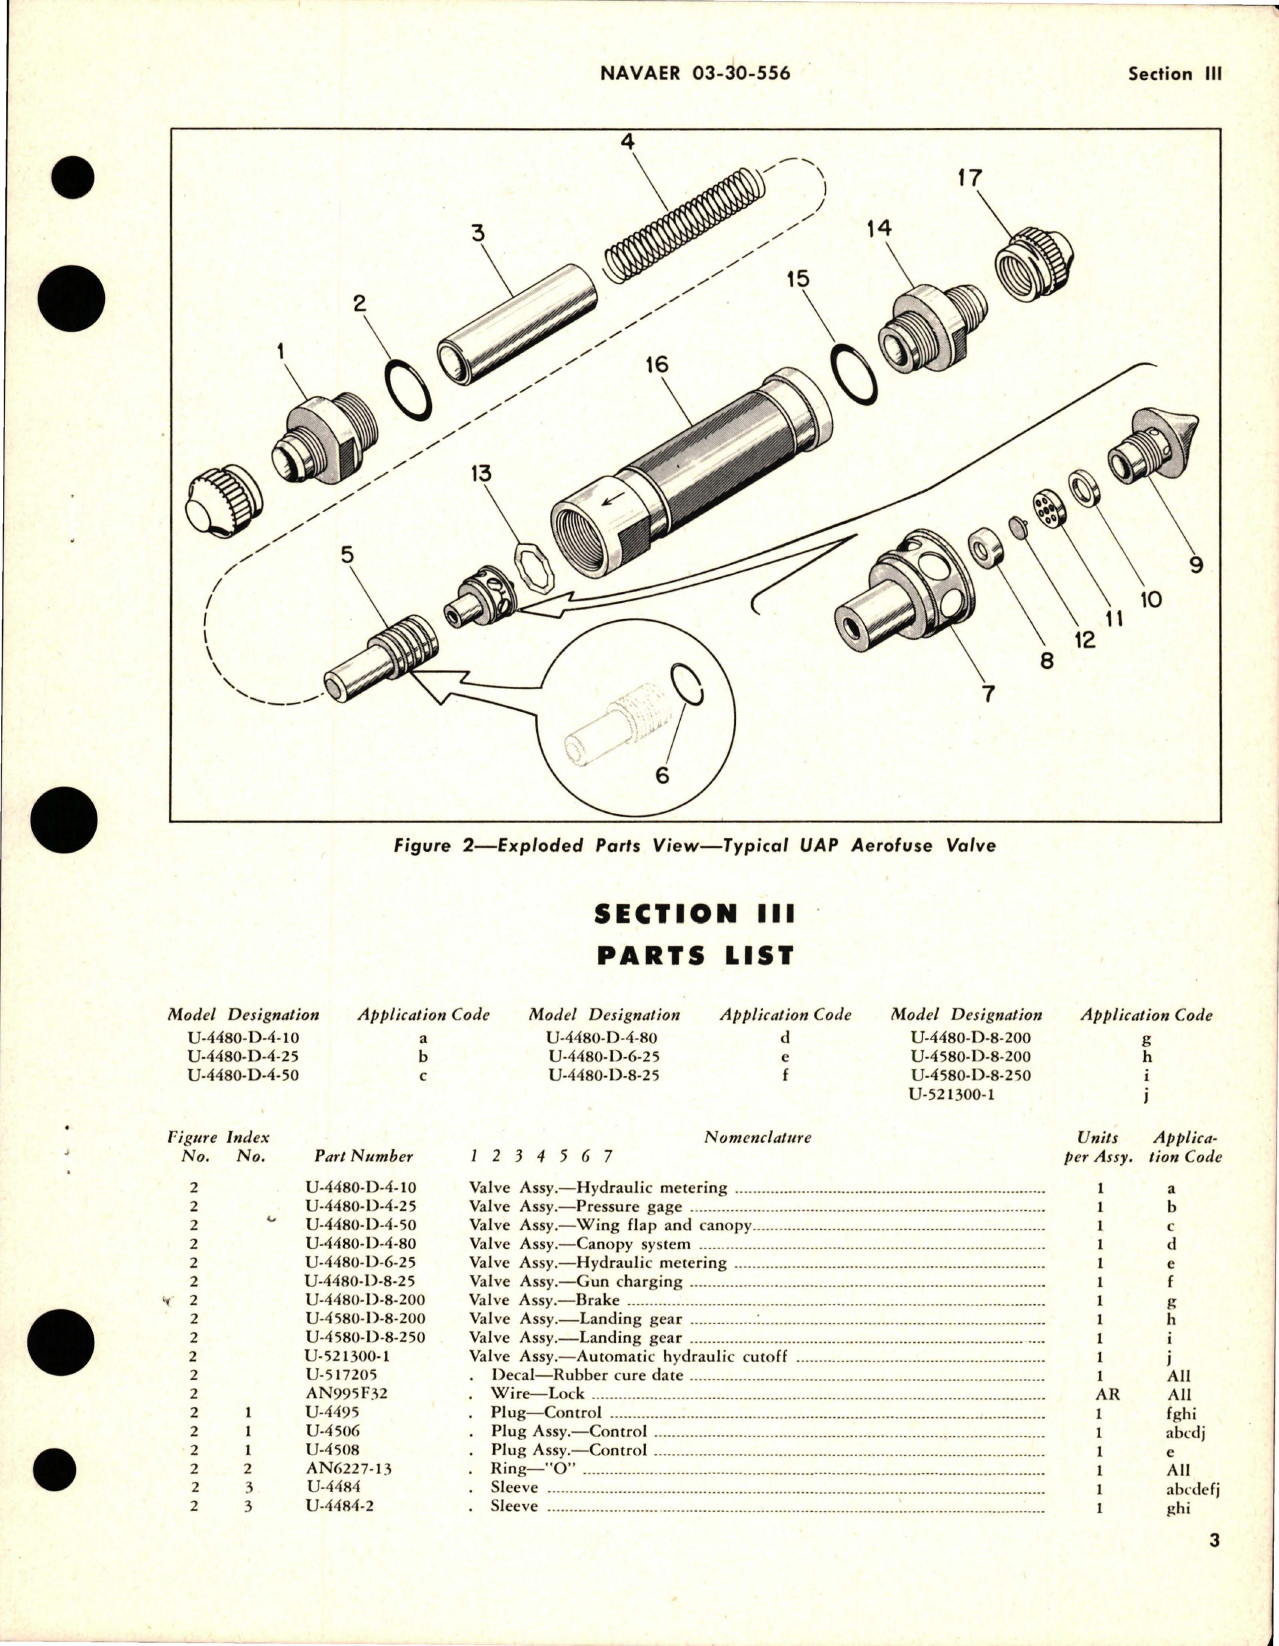 Sample page 5 from AirCorps Library document: Operation, Service and Overhaul Instructions with Parts Catalog for Aerofuse Valves